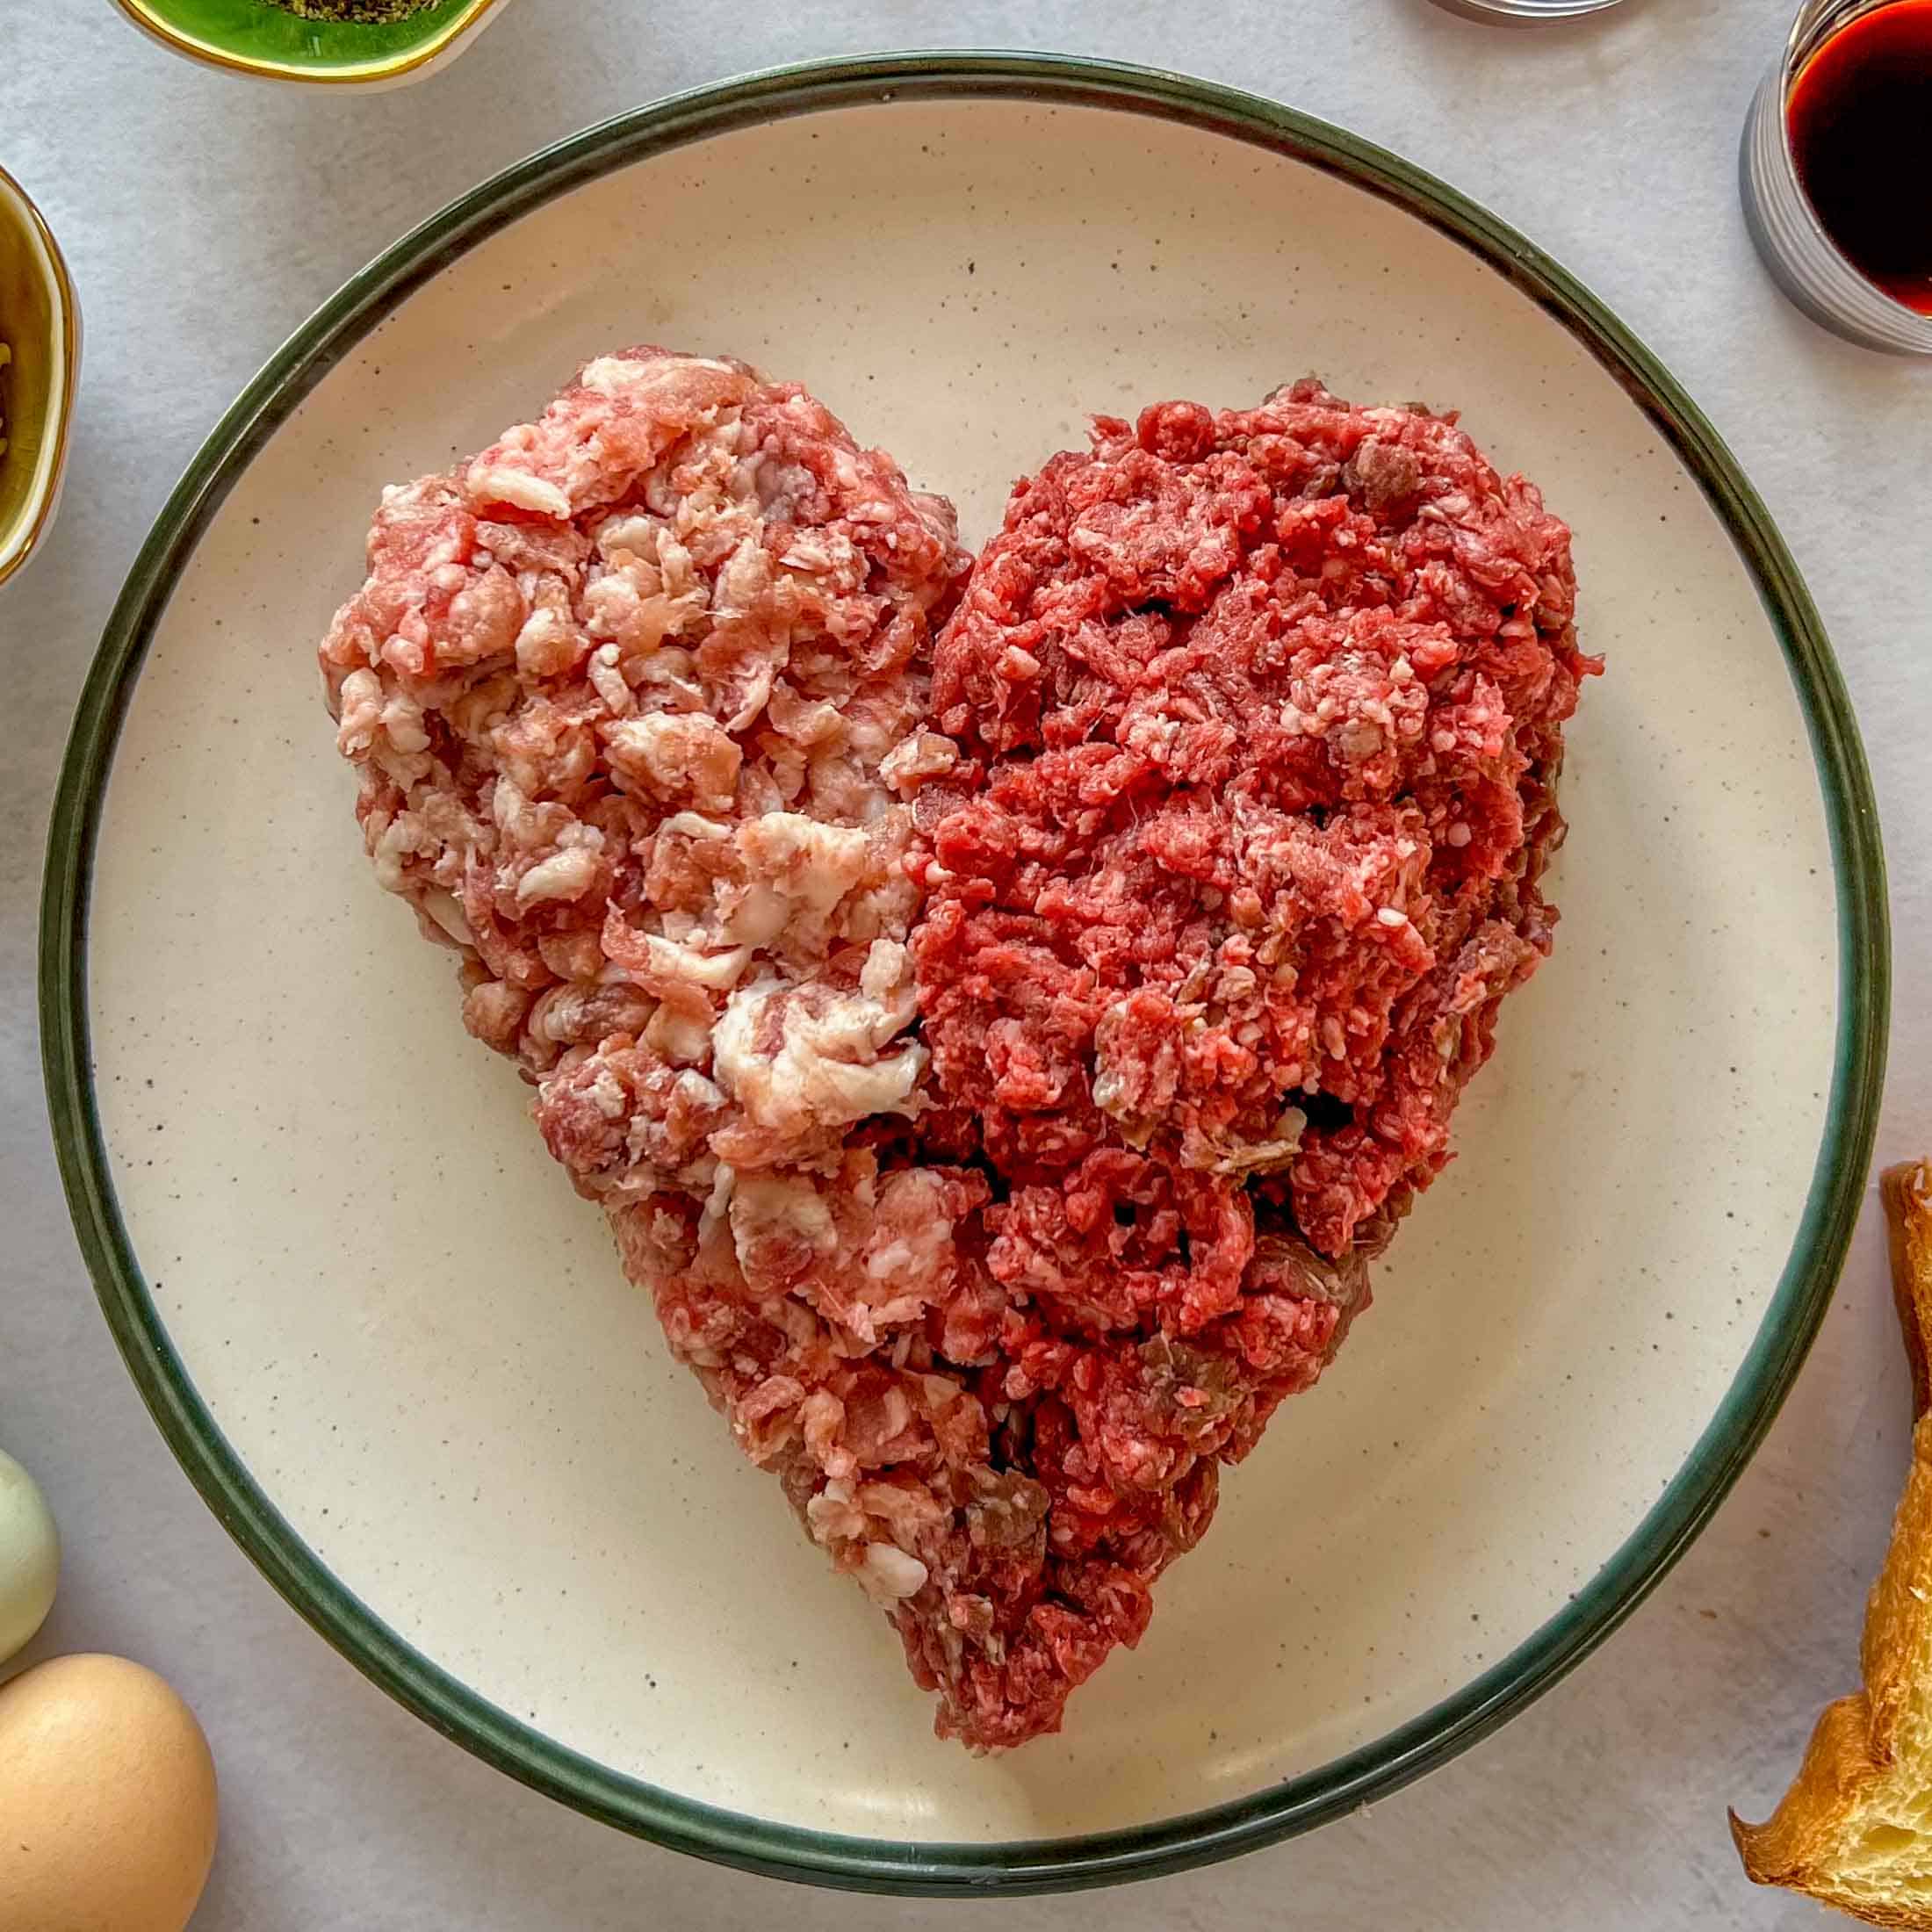 Ground pork and ground venison shaped into a heart on a green rimmed stone wear plate.